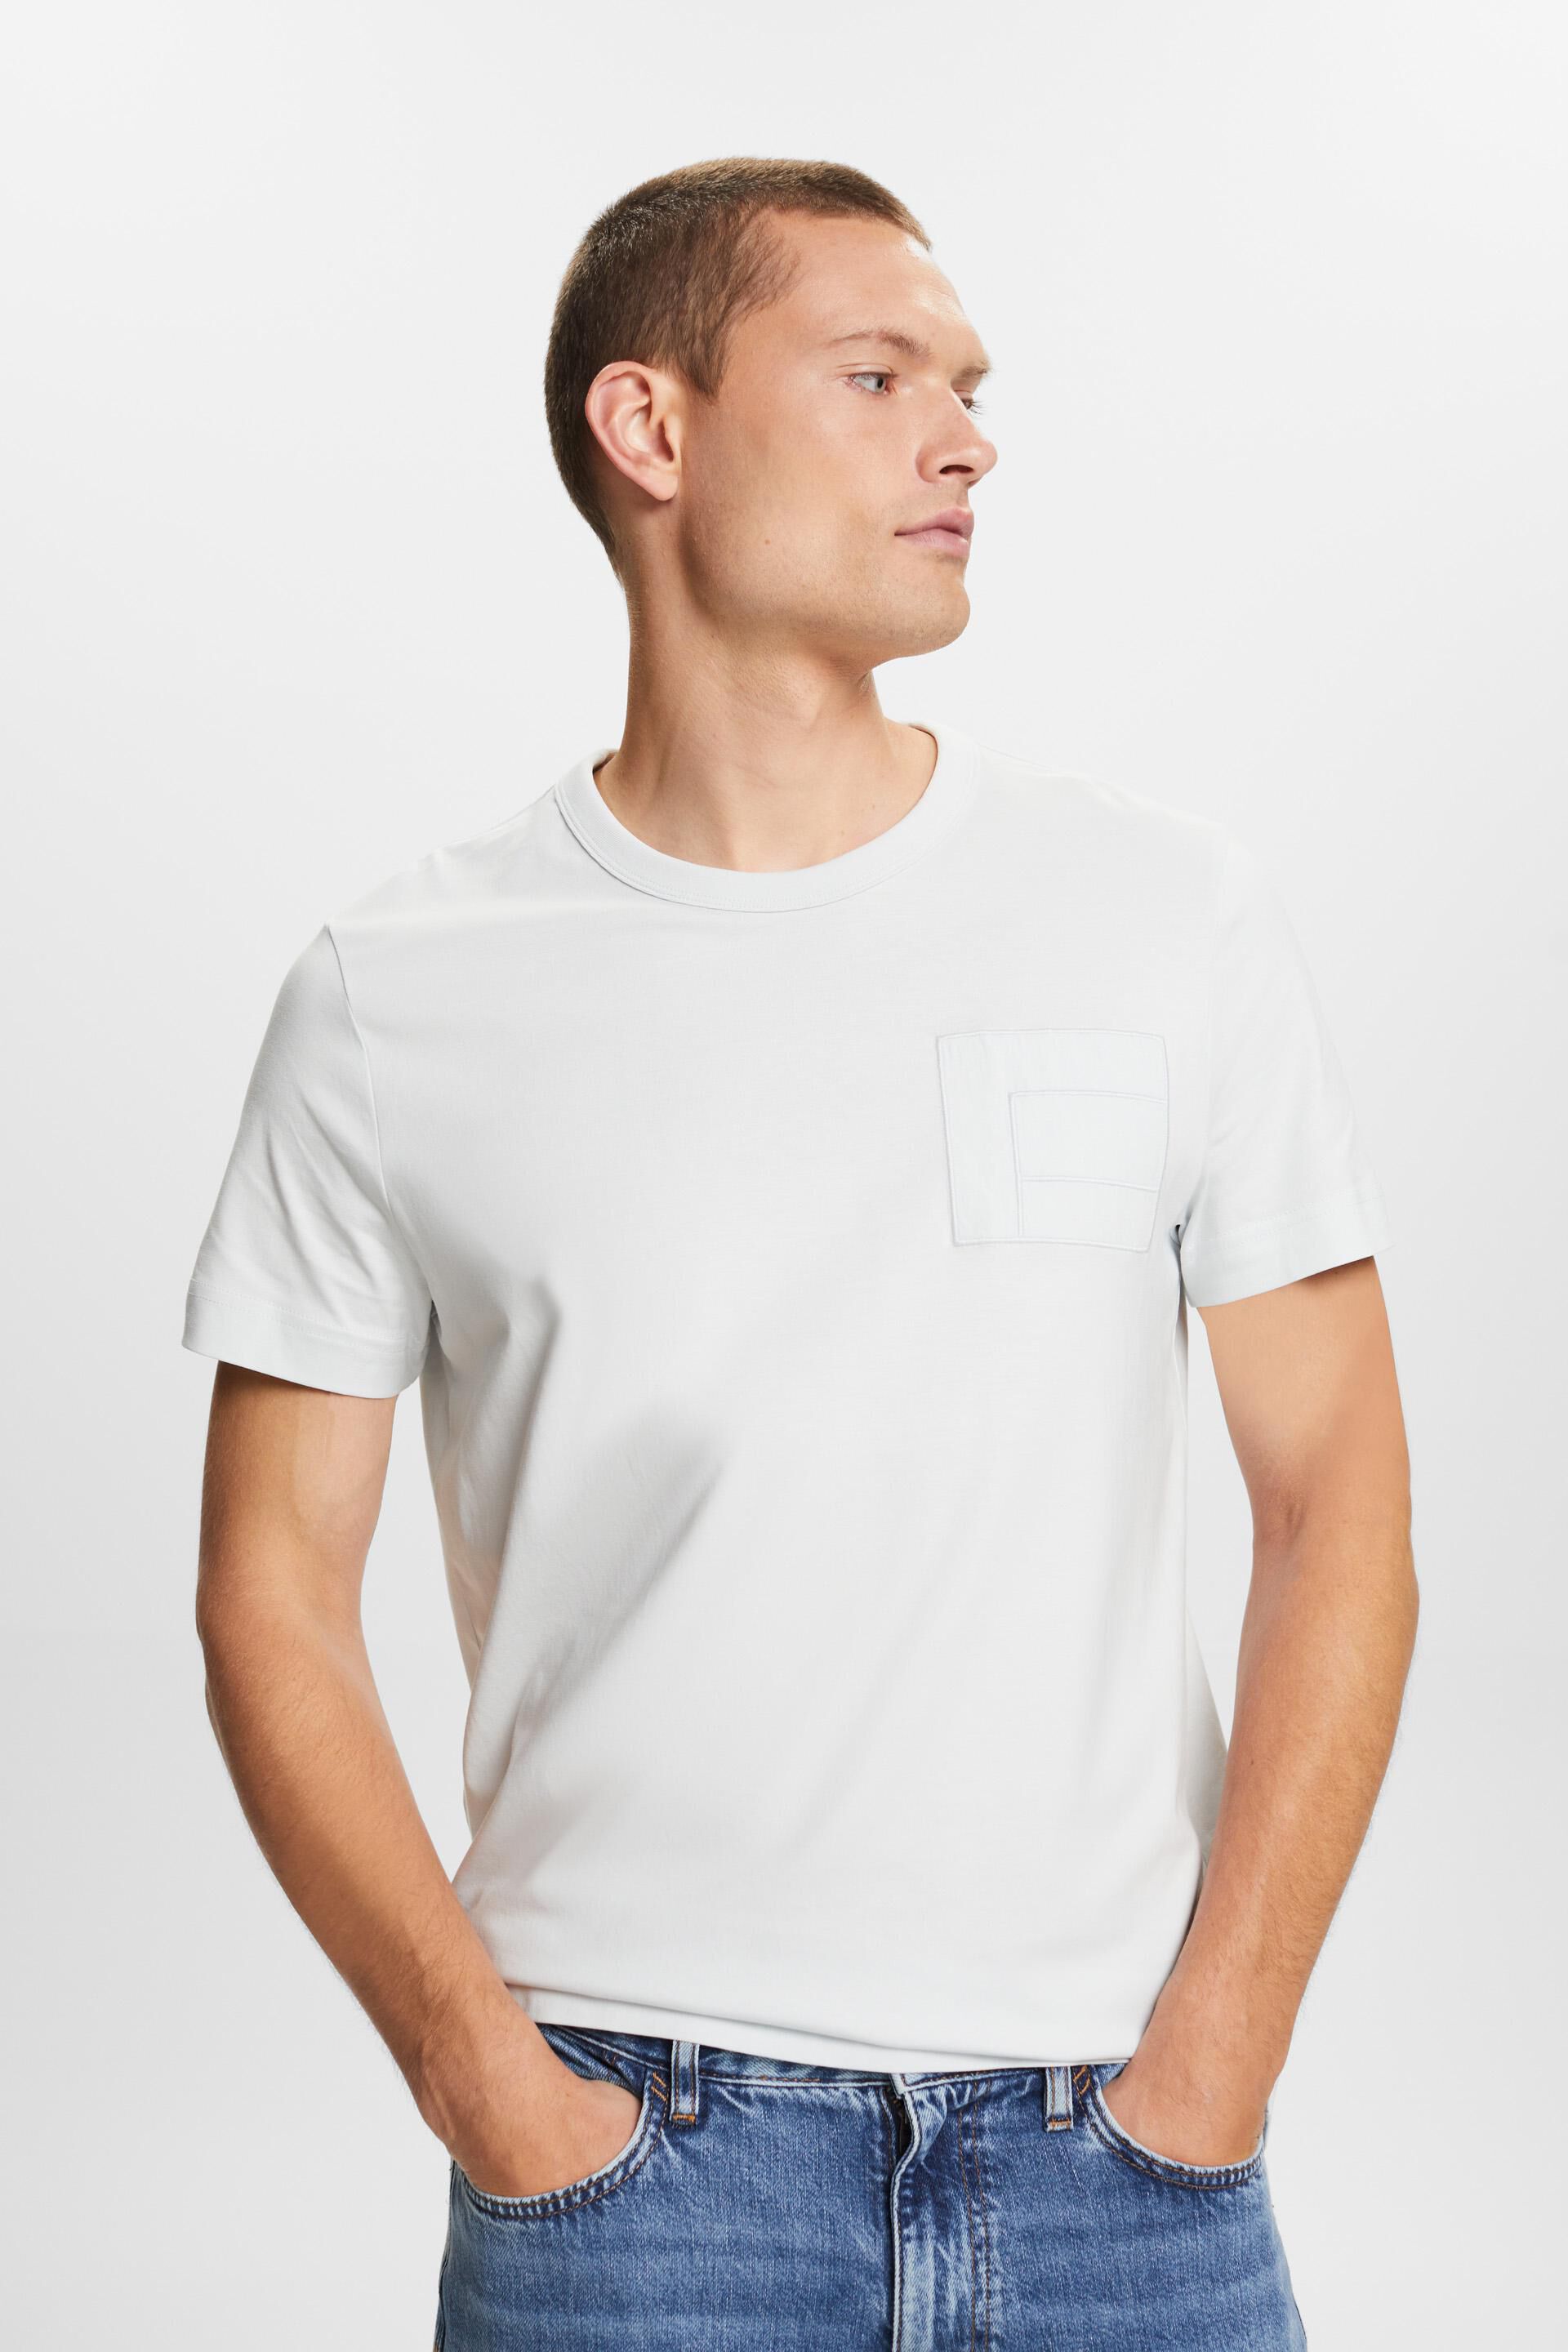 Esprit Jersey 100% cotton t-shirt embroidery, with